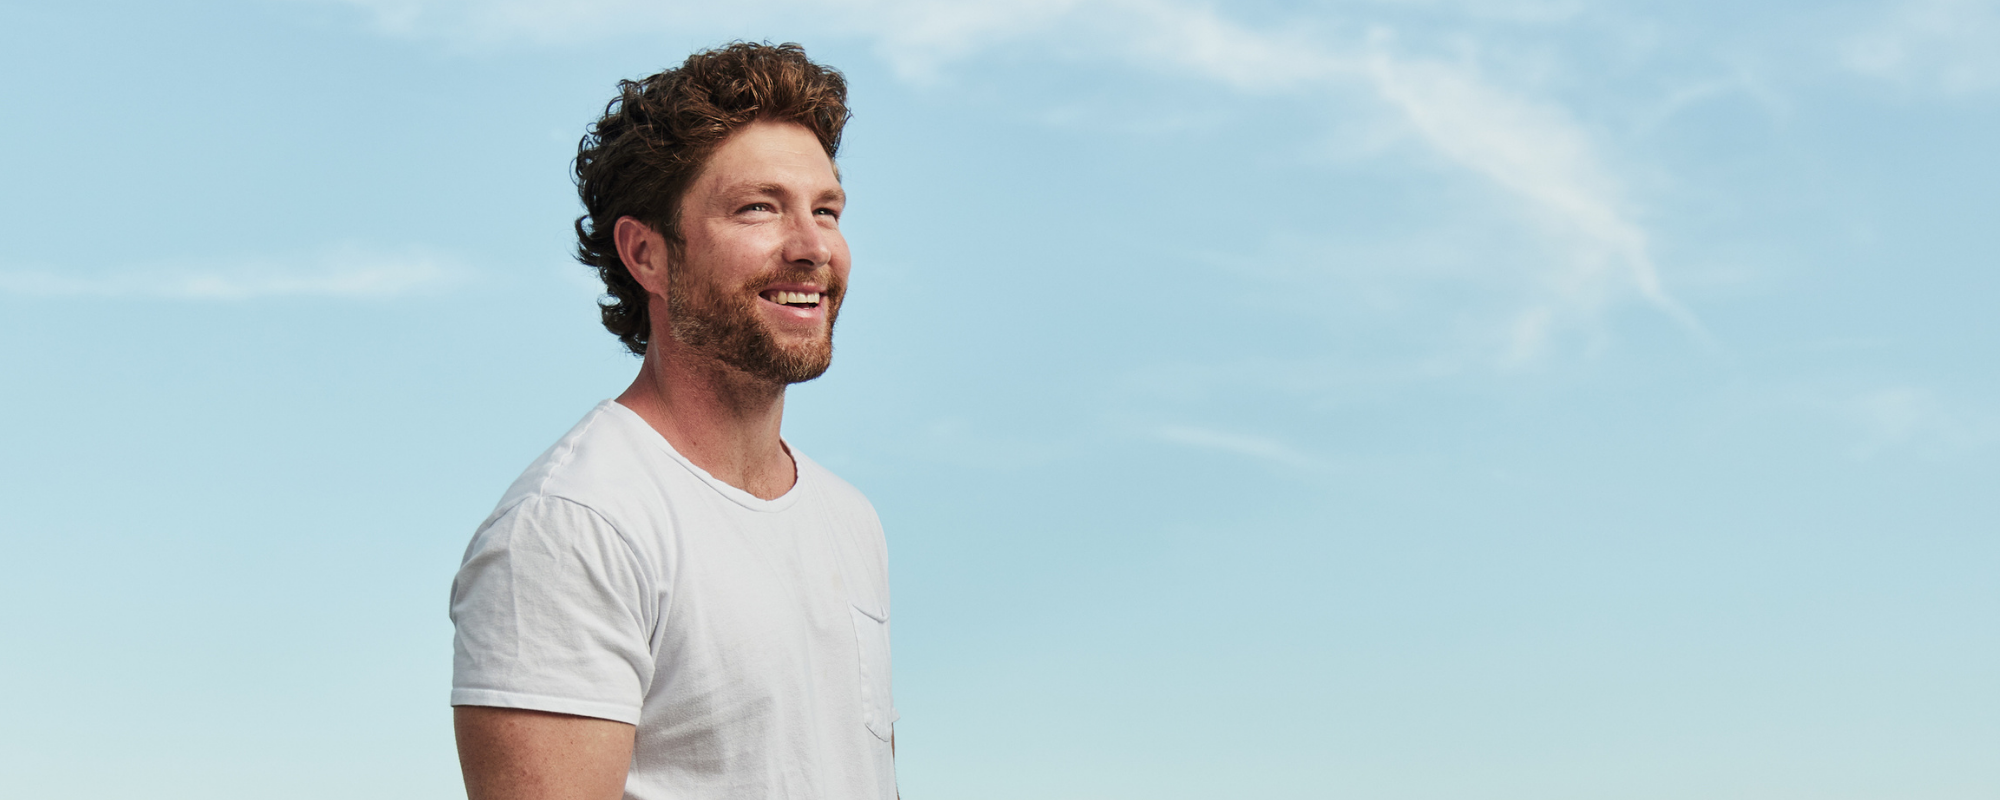 Chris Lane On Songwriting, Record Cycles, and His New Single “Fill Them Boots”